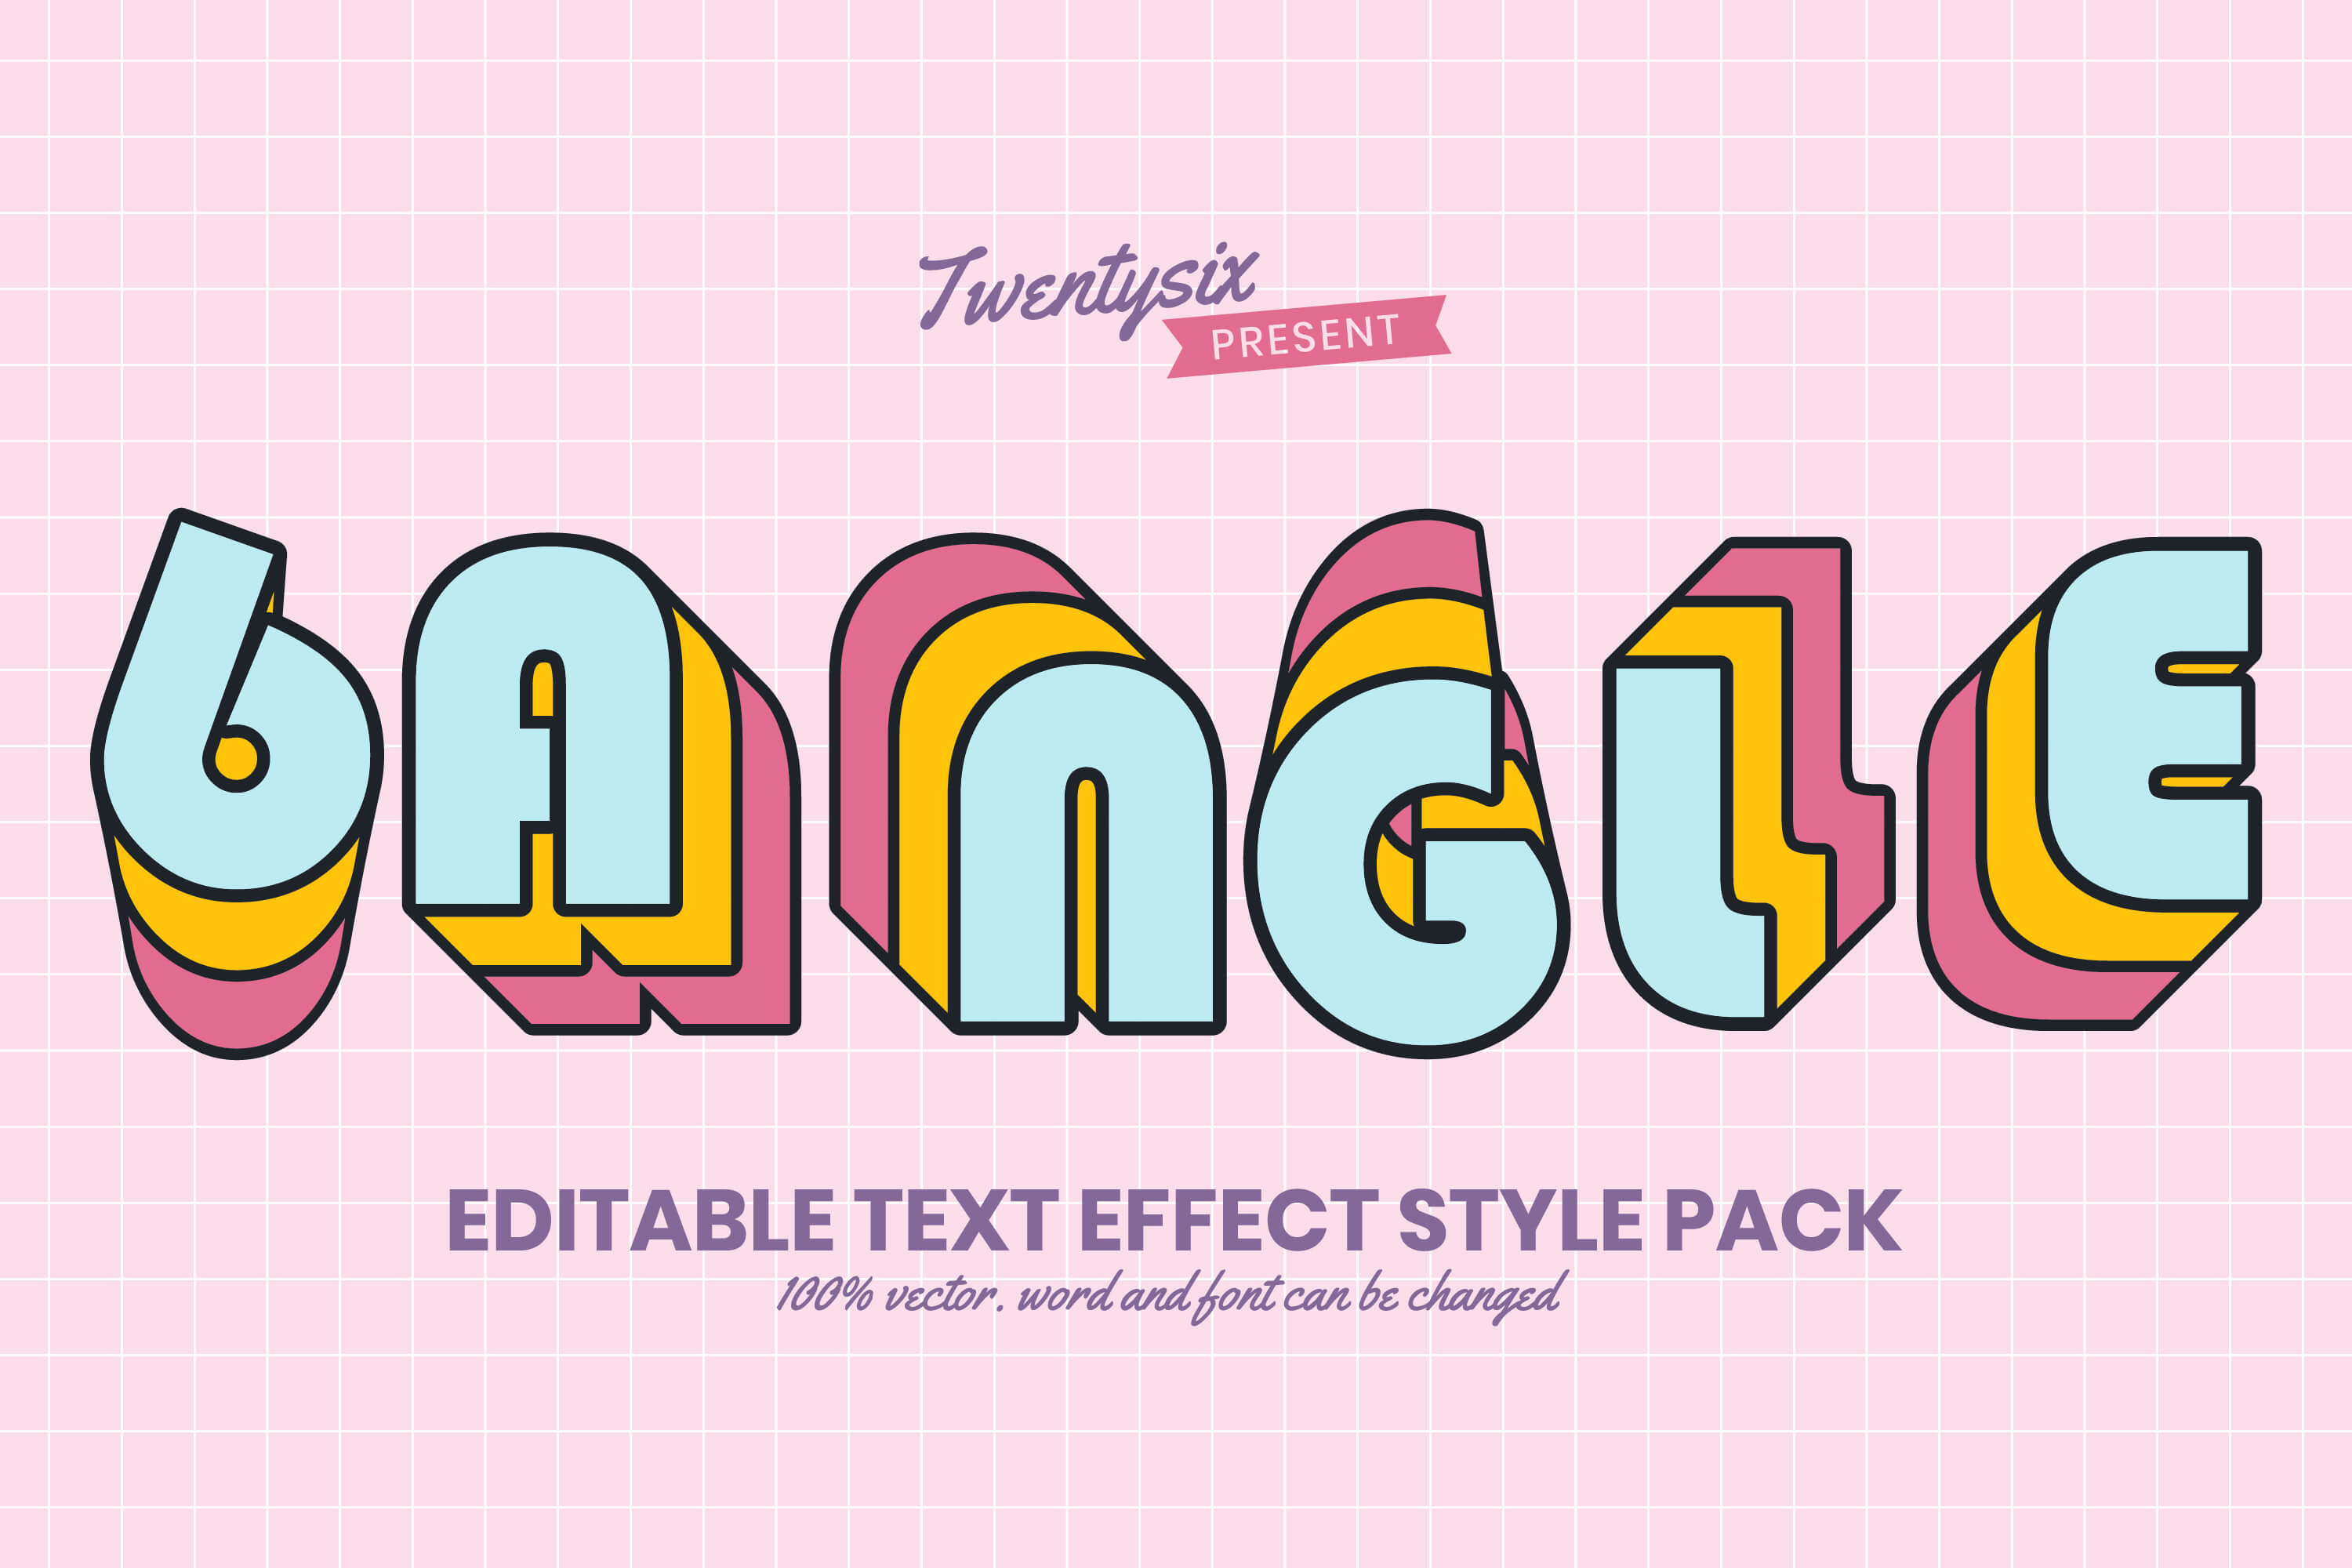 6 Retro Text Effect Style Editable for Illustrator facebook image.